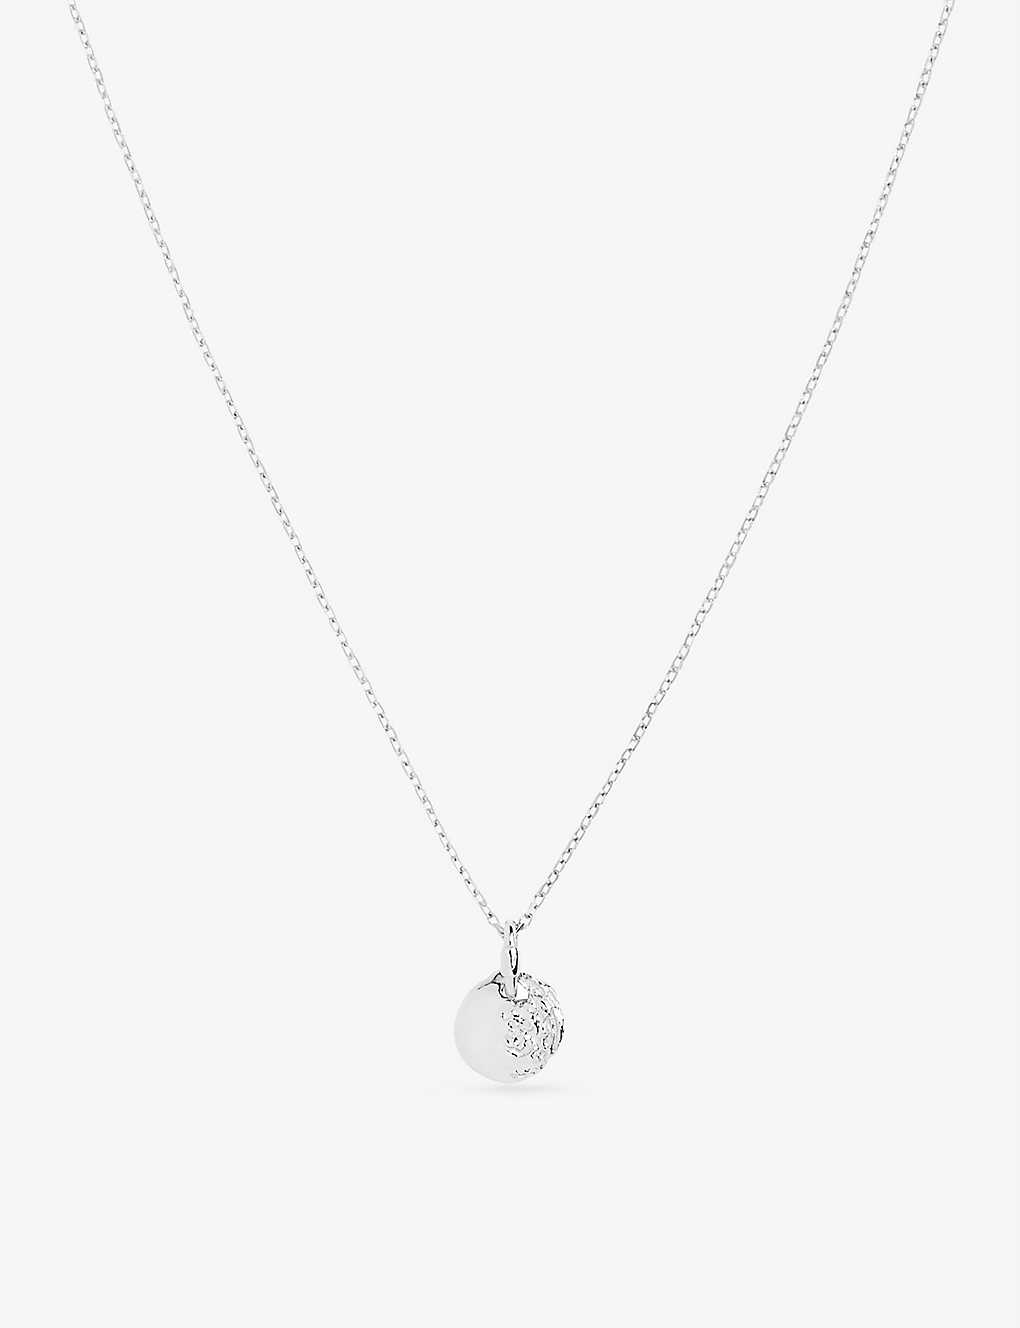 Maria Black Aspen 22ct Rhodium-plated Sterling-silver Pendant Necklace